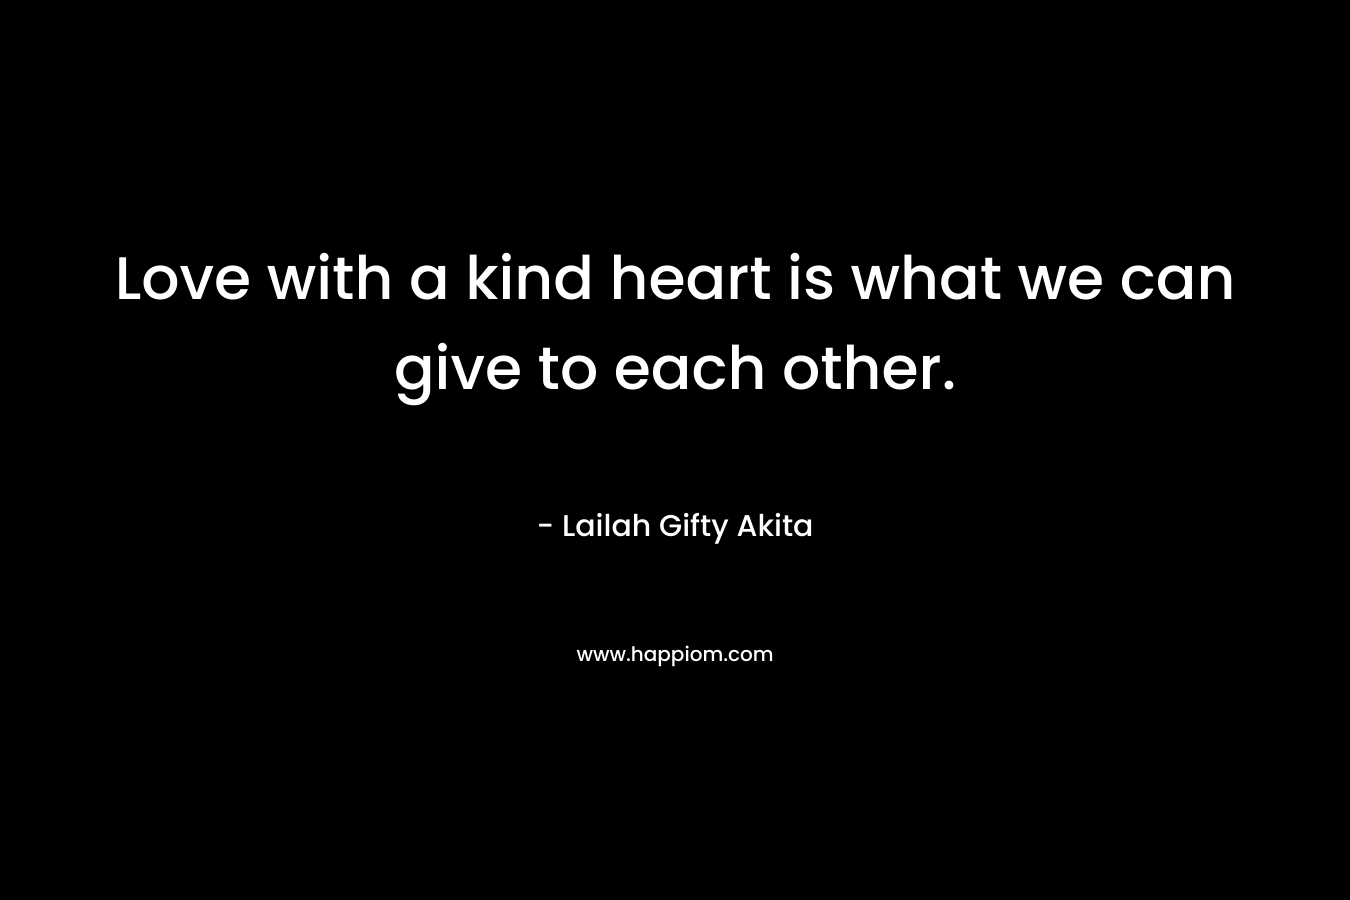 Love with a kind heart is what we can give to each other.